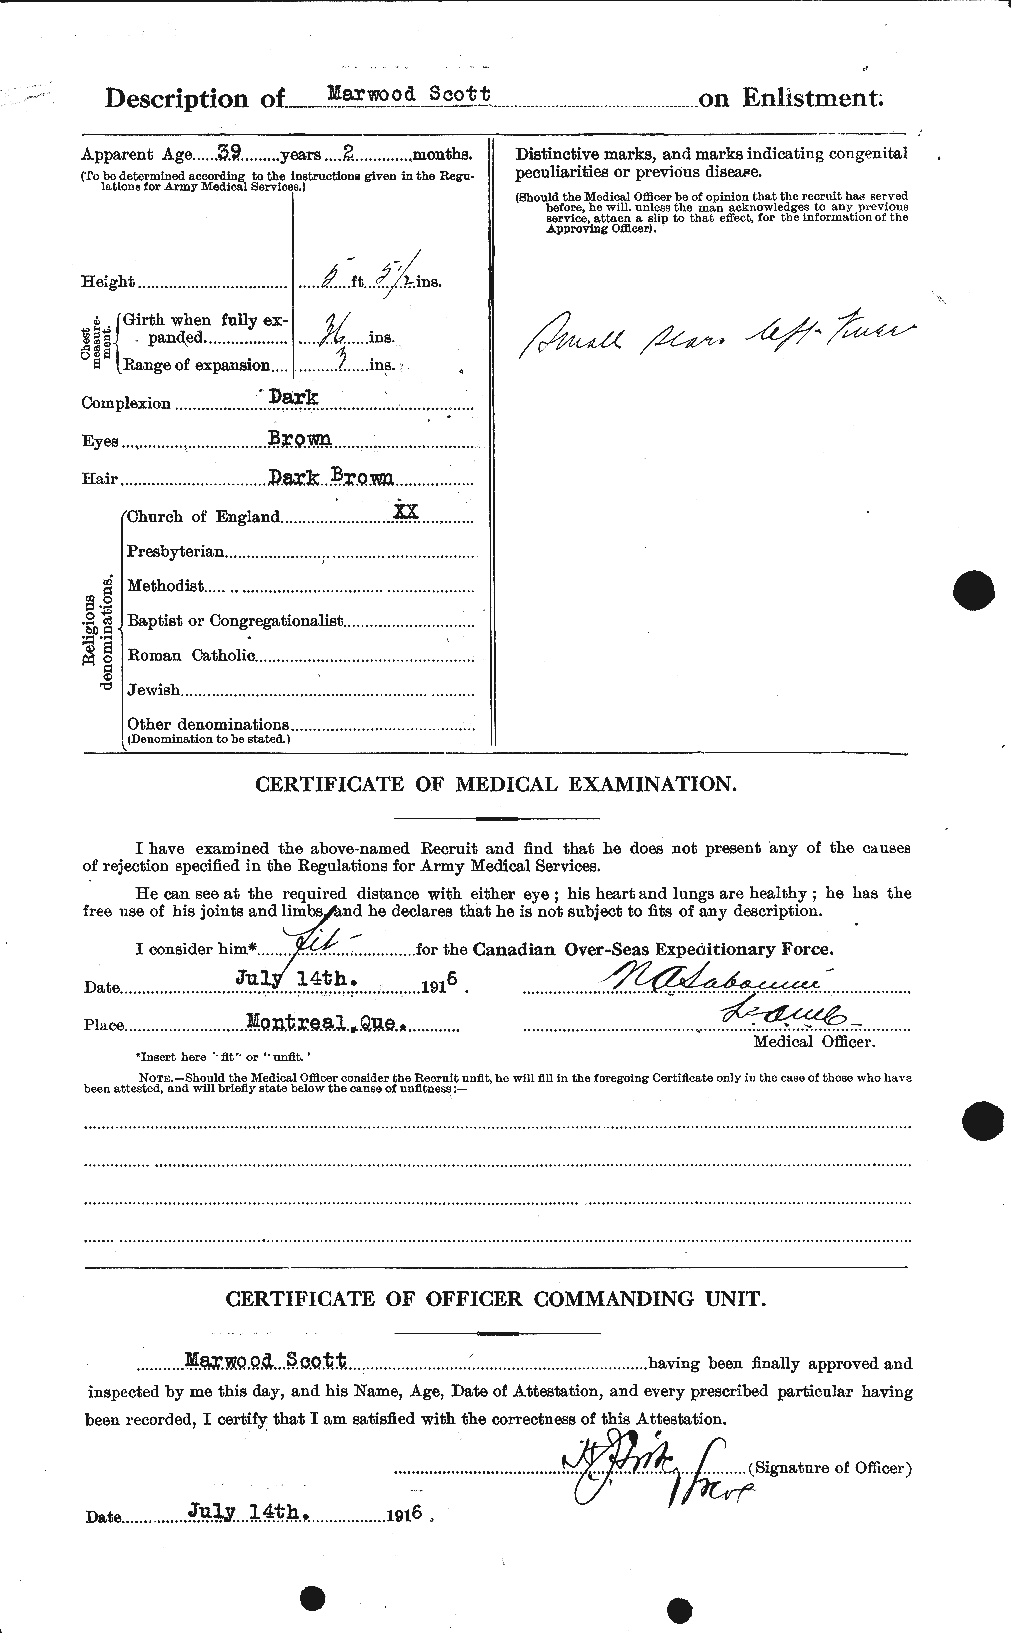 Personnel Records of the First World War - CEF 083509b